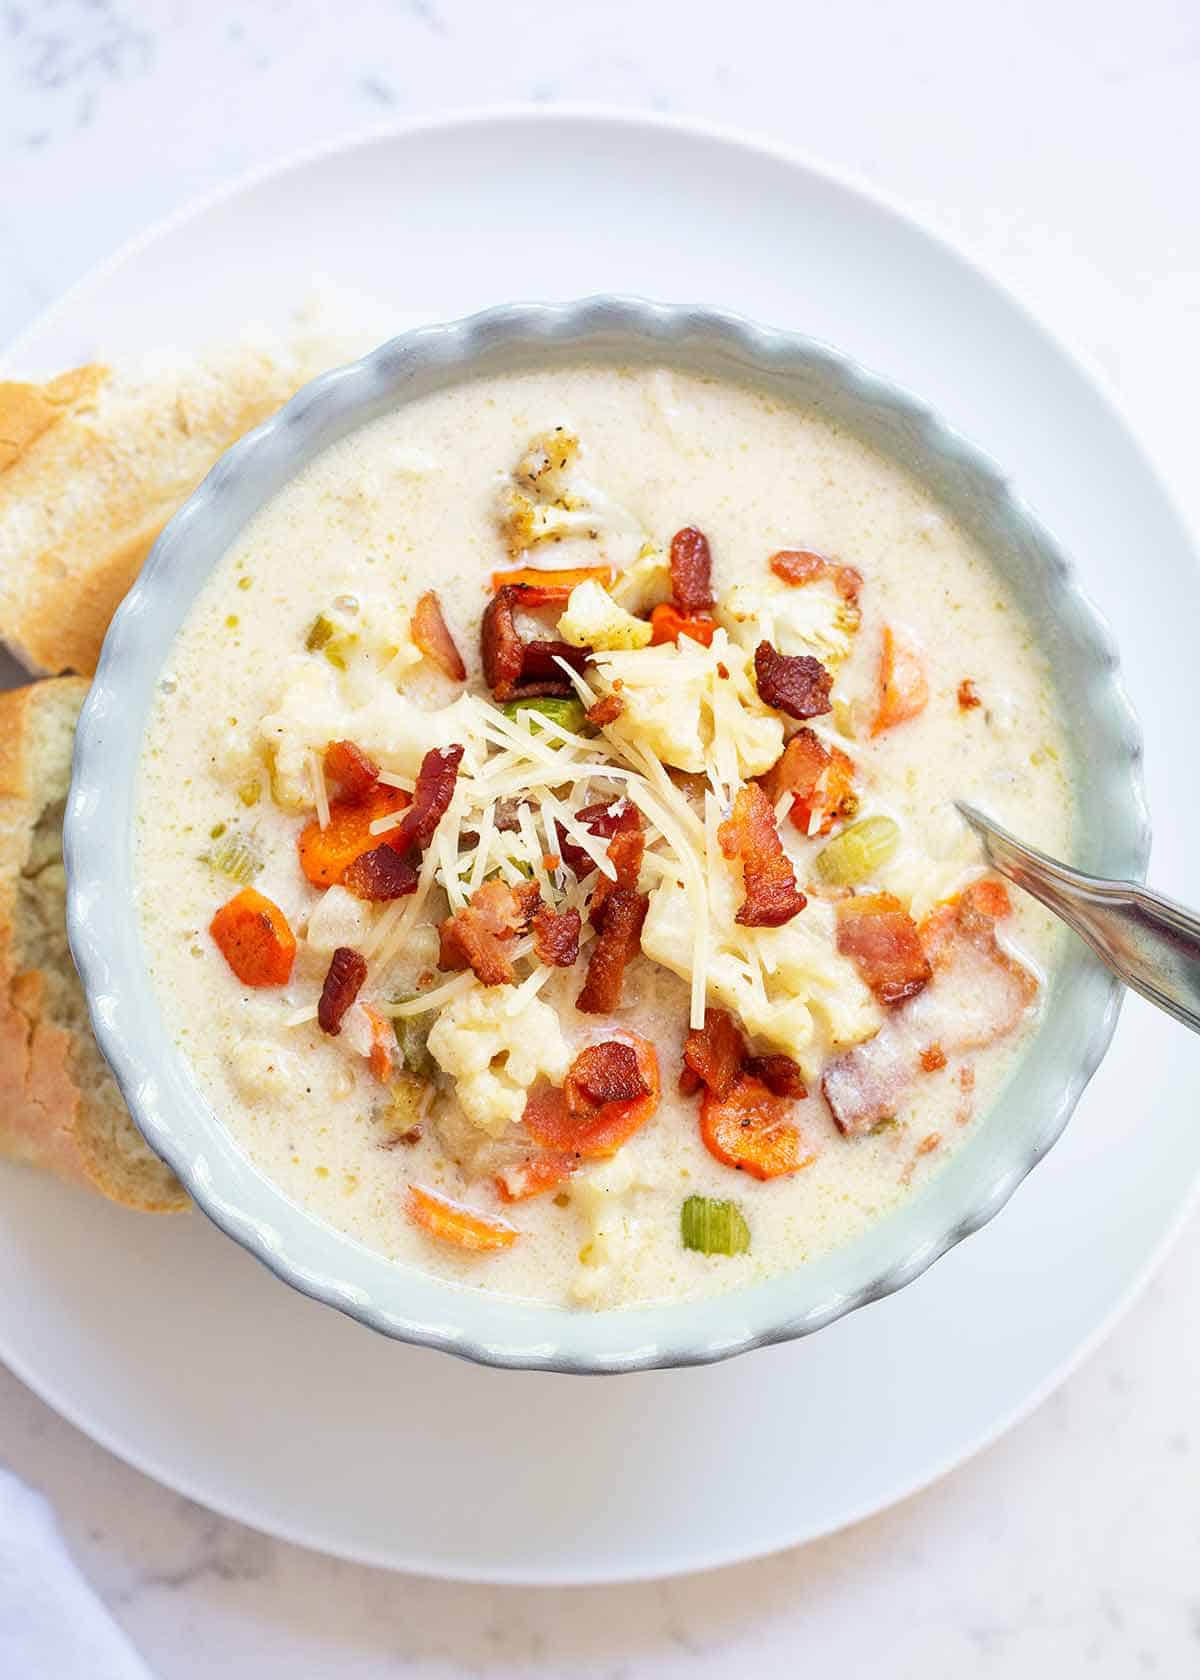 Cauliflower soup with bread on plate.